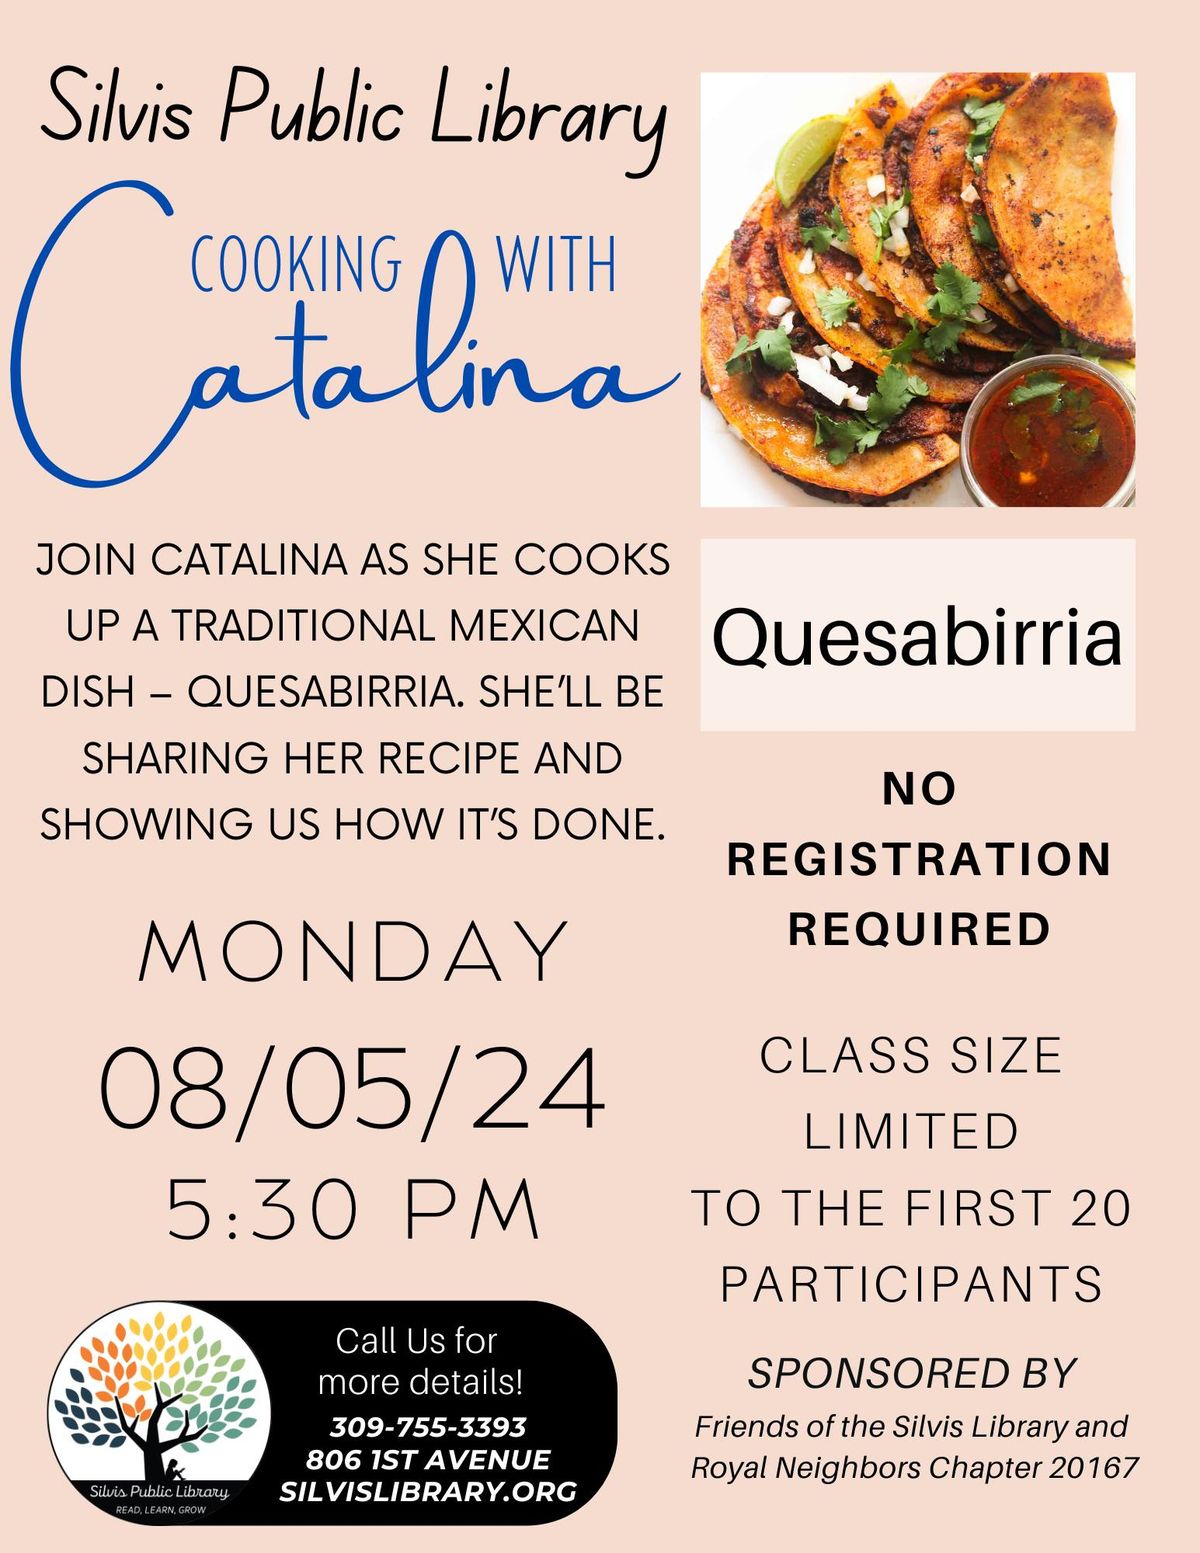 Cooking with Catalina: Quesabirria